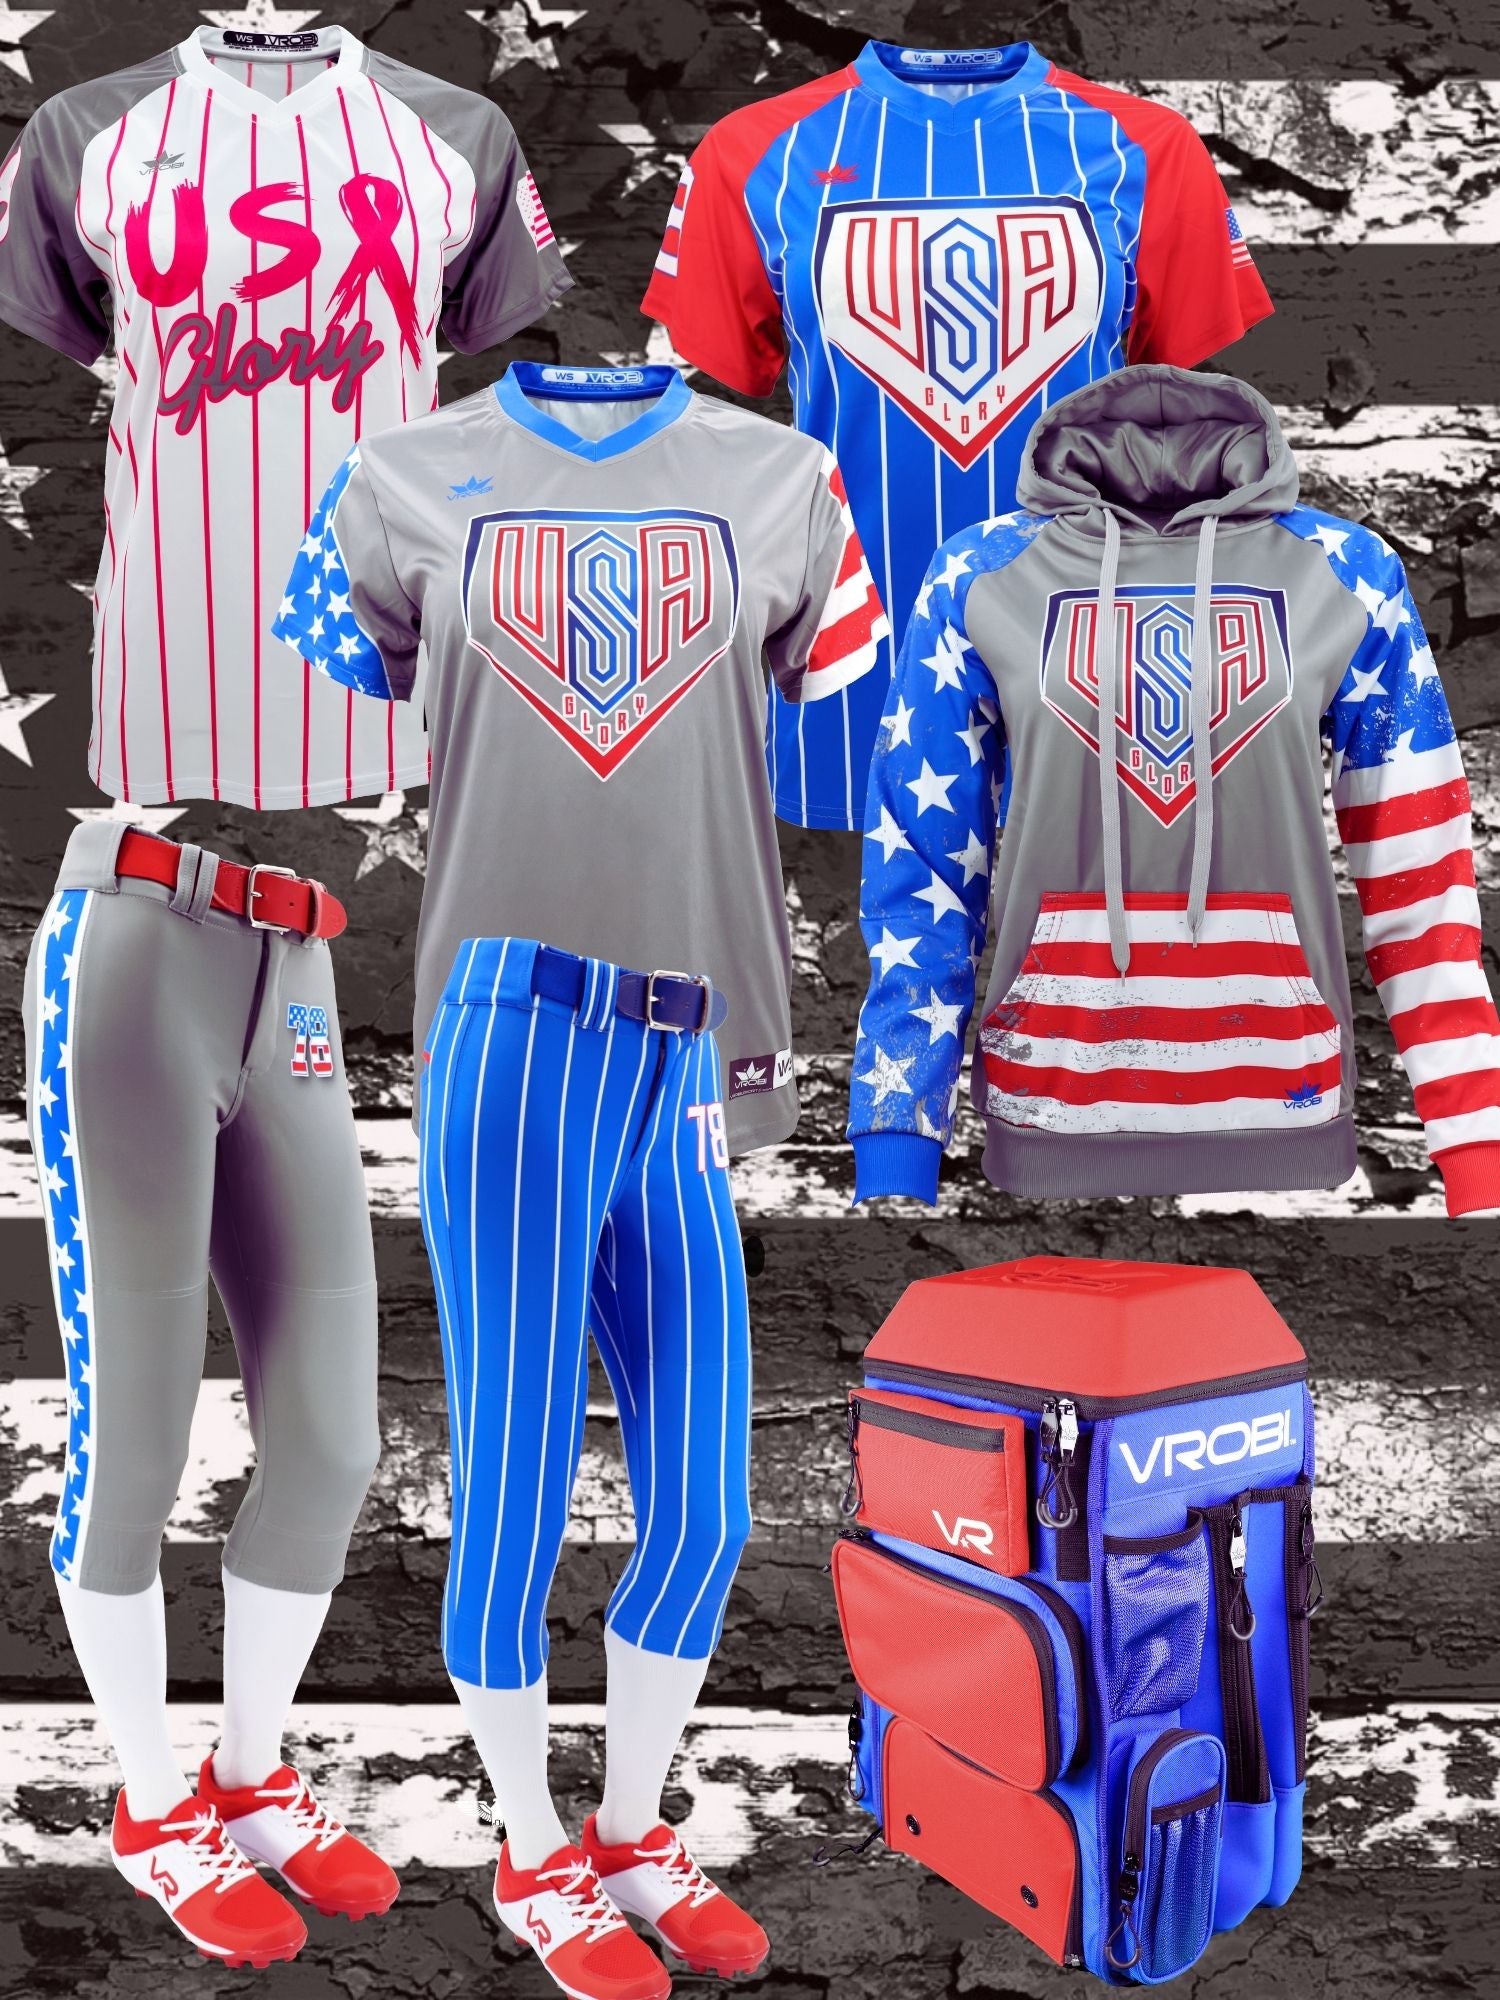 Platinum Package for Fastpitch Softball showing custom uniforms and Bat Pack